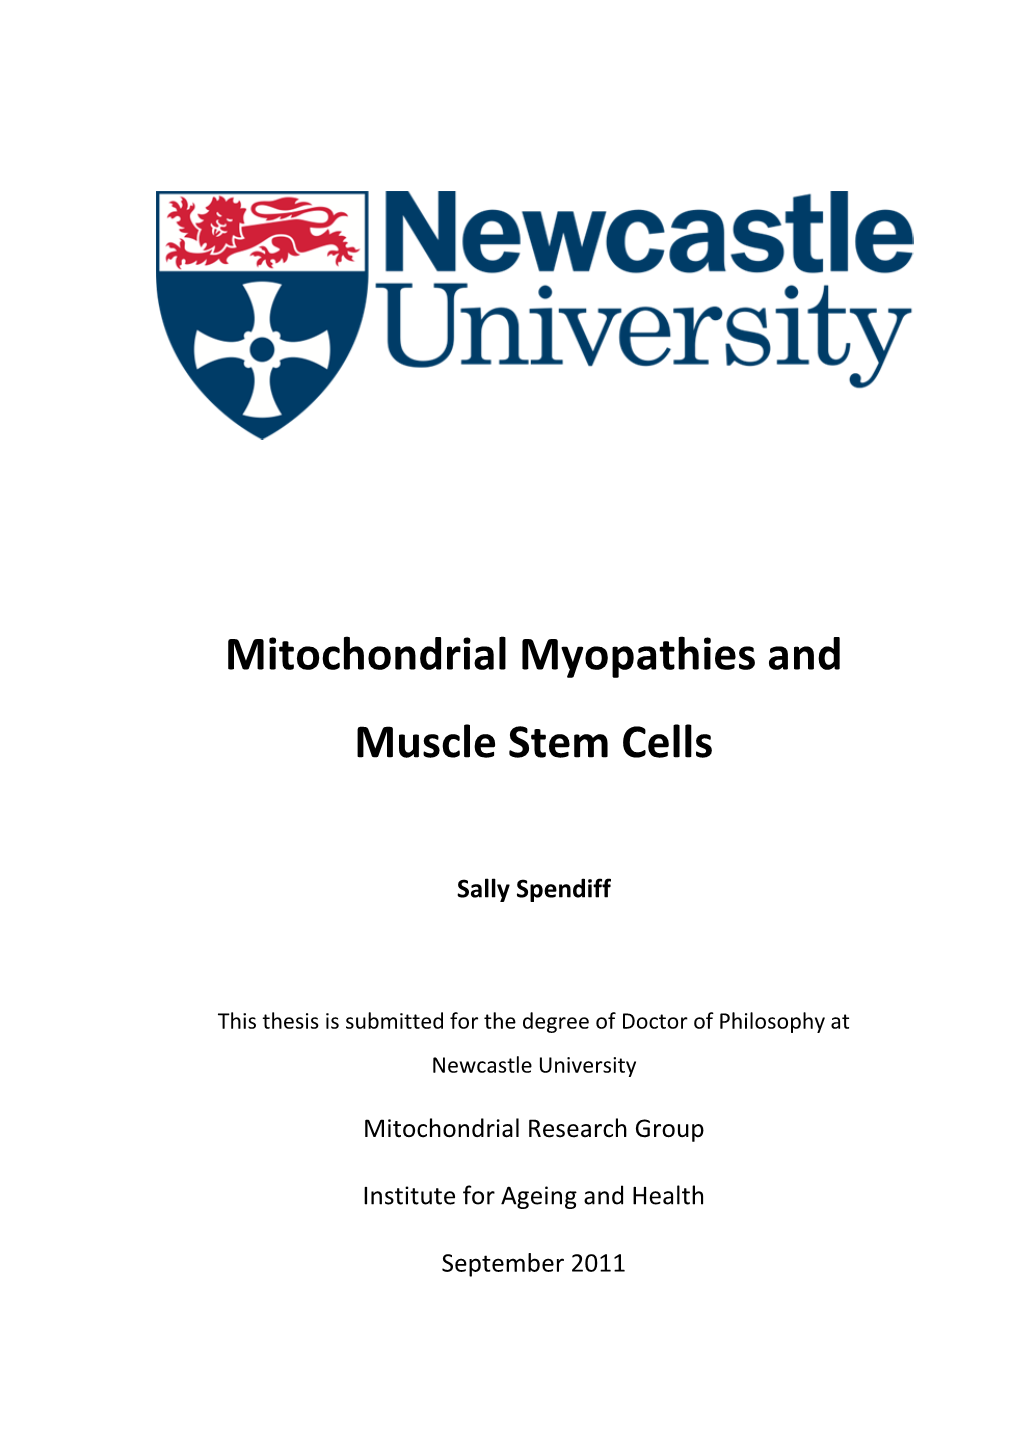 Mitochondrial Myopathies and Muscle Stem Cells